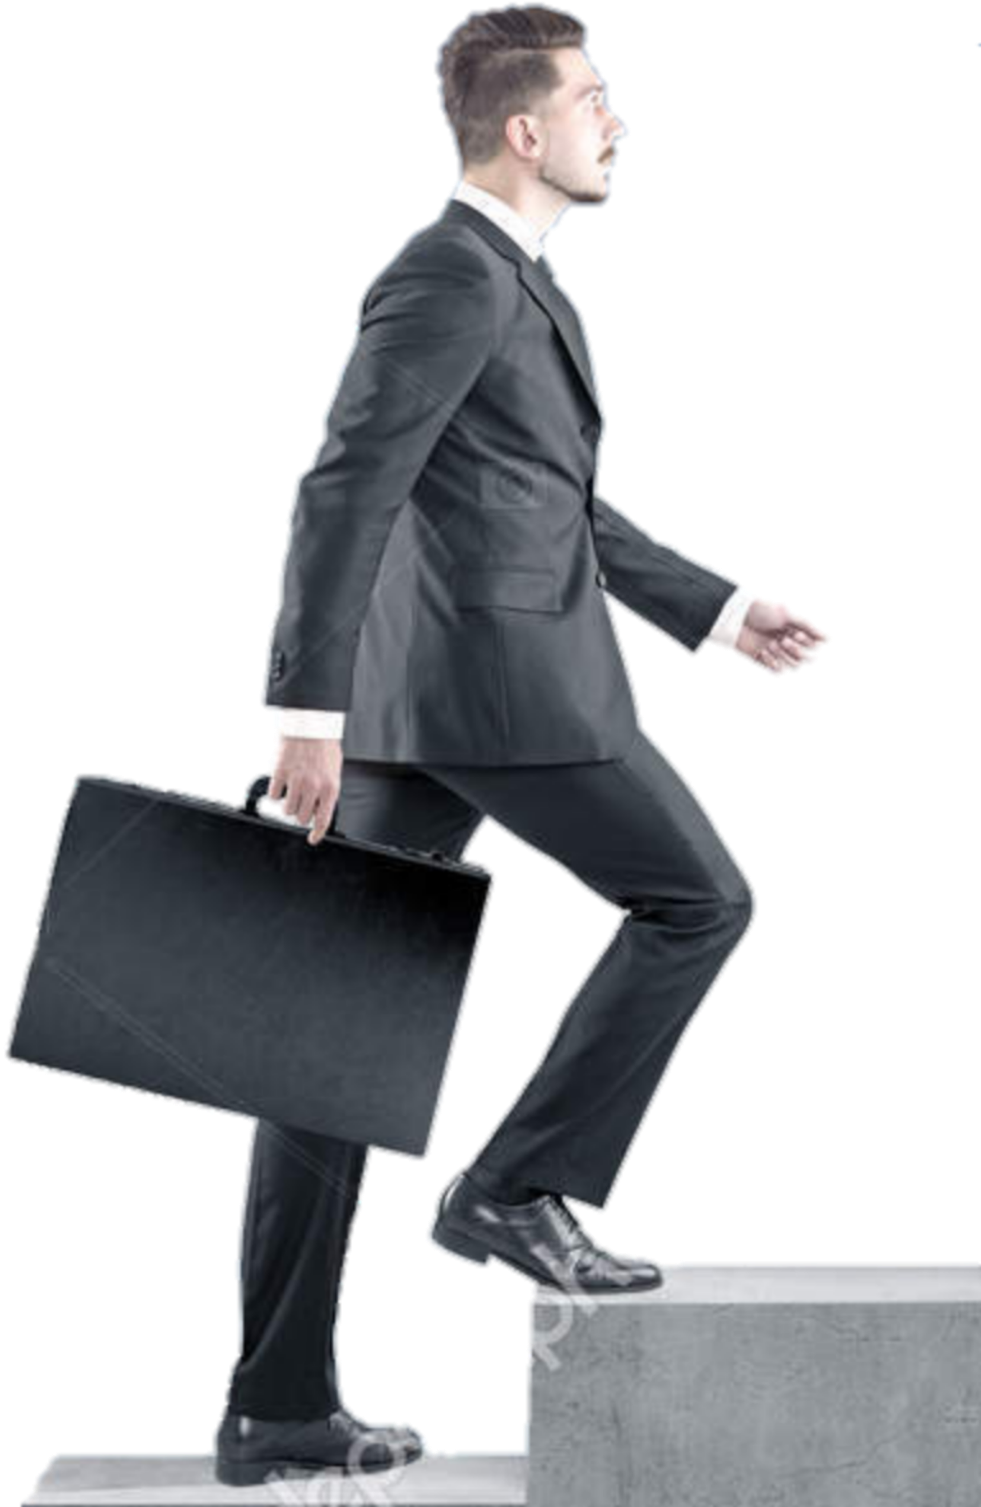 A Man In A Suit And Hat Holding A Briefcase